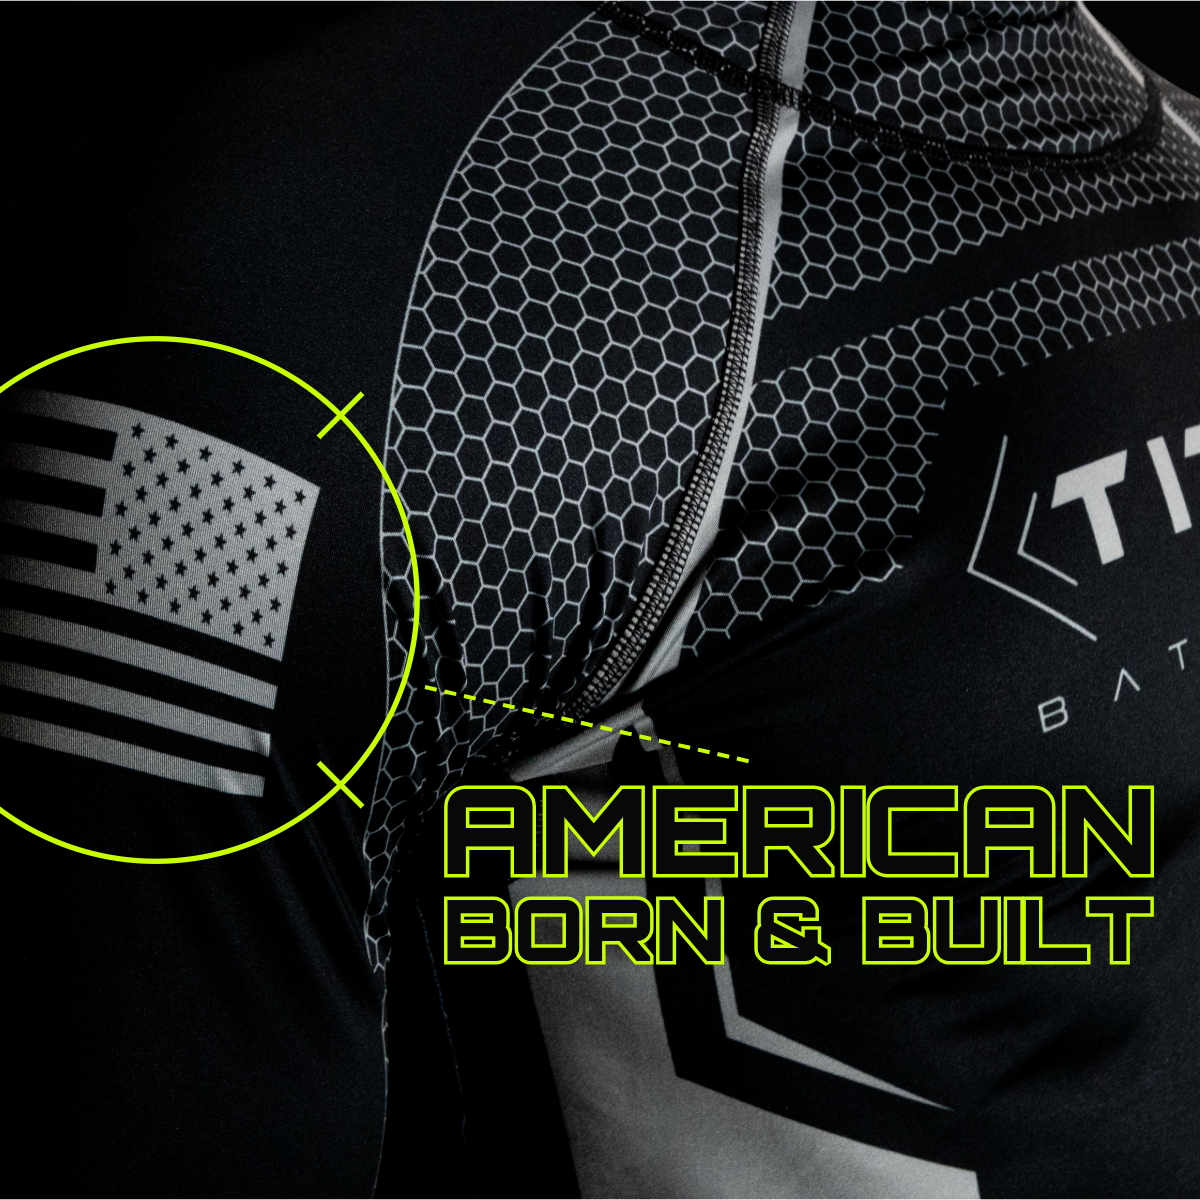 Close-up of a Titan Battlegear hockey neck guard shirt, showcasing the detailed hexagonal pattern and the Titan logo on the chest. The sleeve features an American flag design, emphasizing the shirt's craftsmanship and durability.